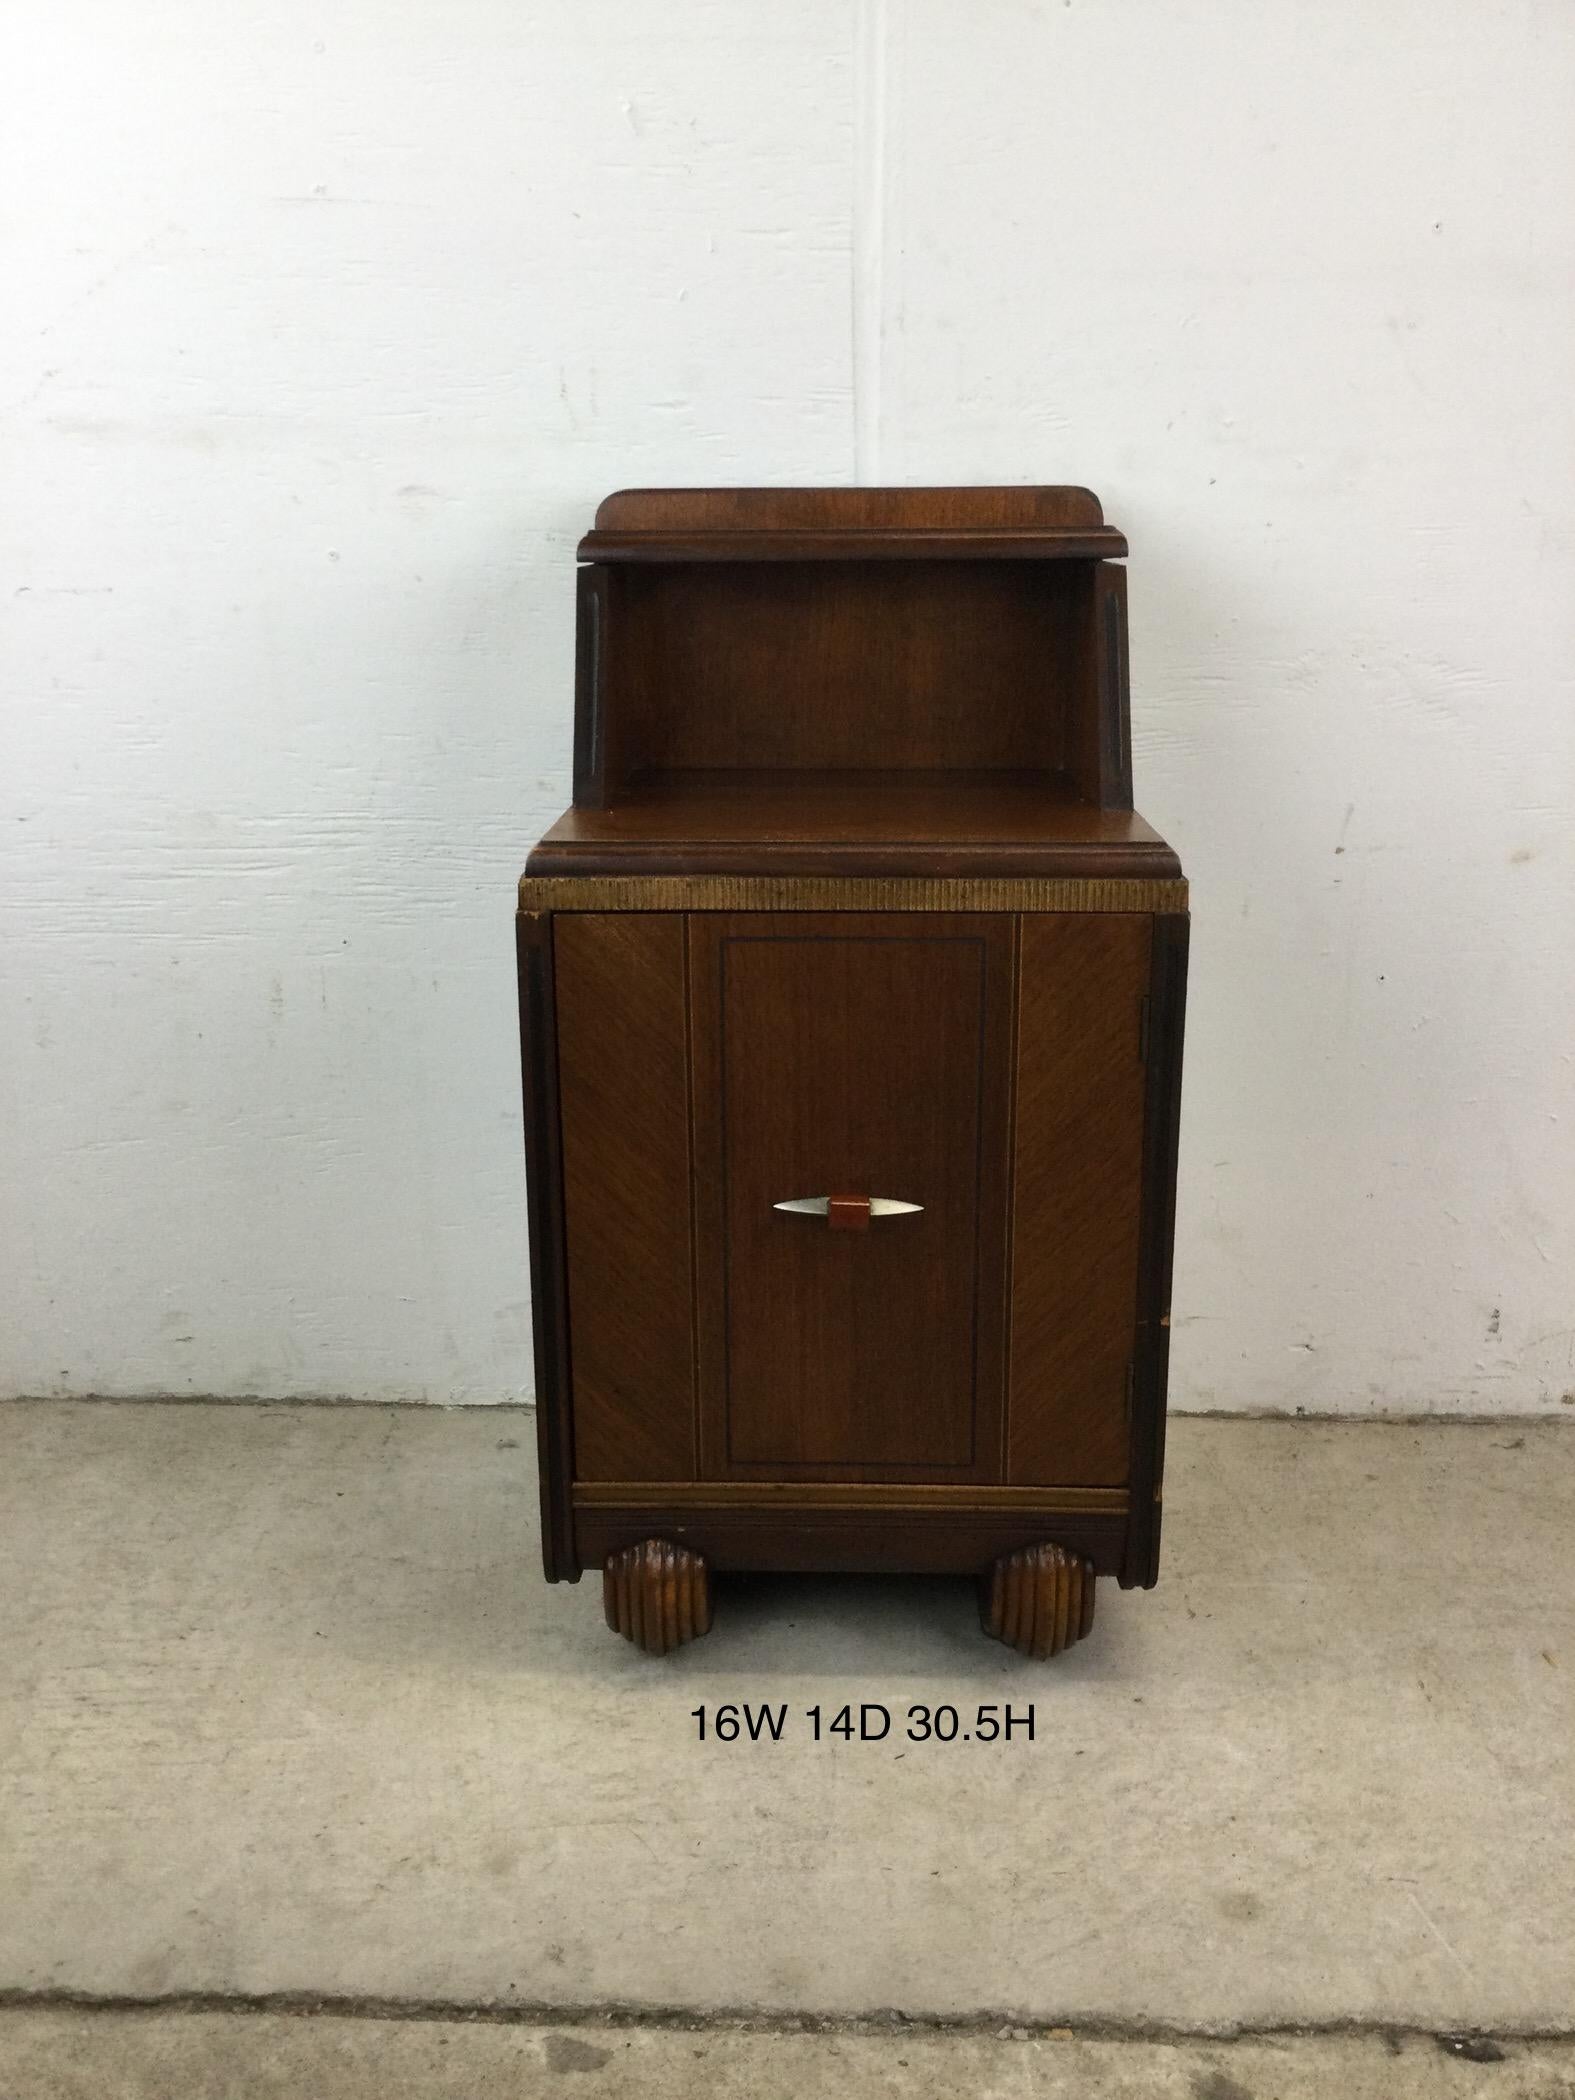 This antique art deco nightstand features hardwood construction, walnut veneer with original finish, single dovetailed we drawer with Bakelite & chrome hardware, cabinet with interior storage, and two unique carved wood feet.   Matching lowboy